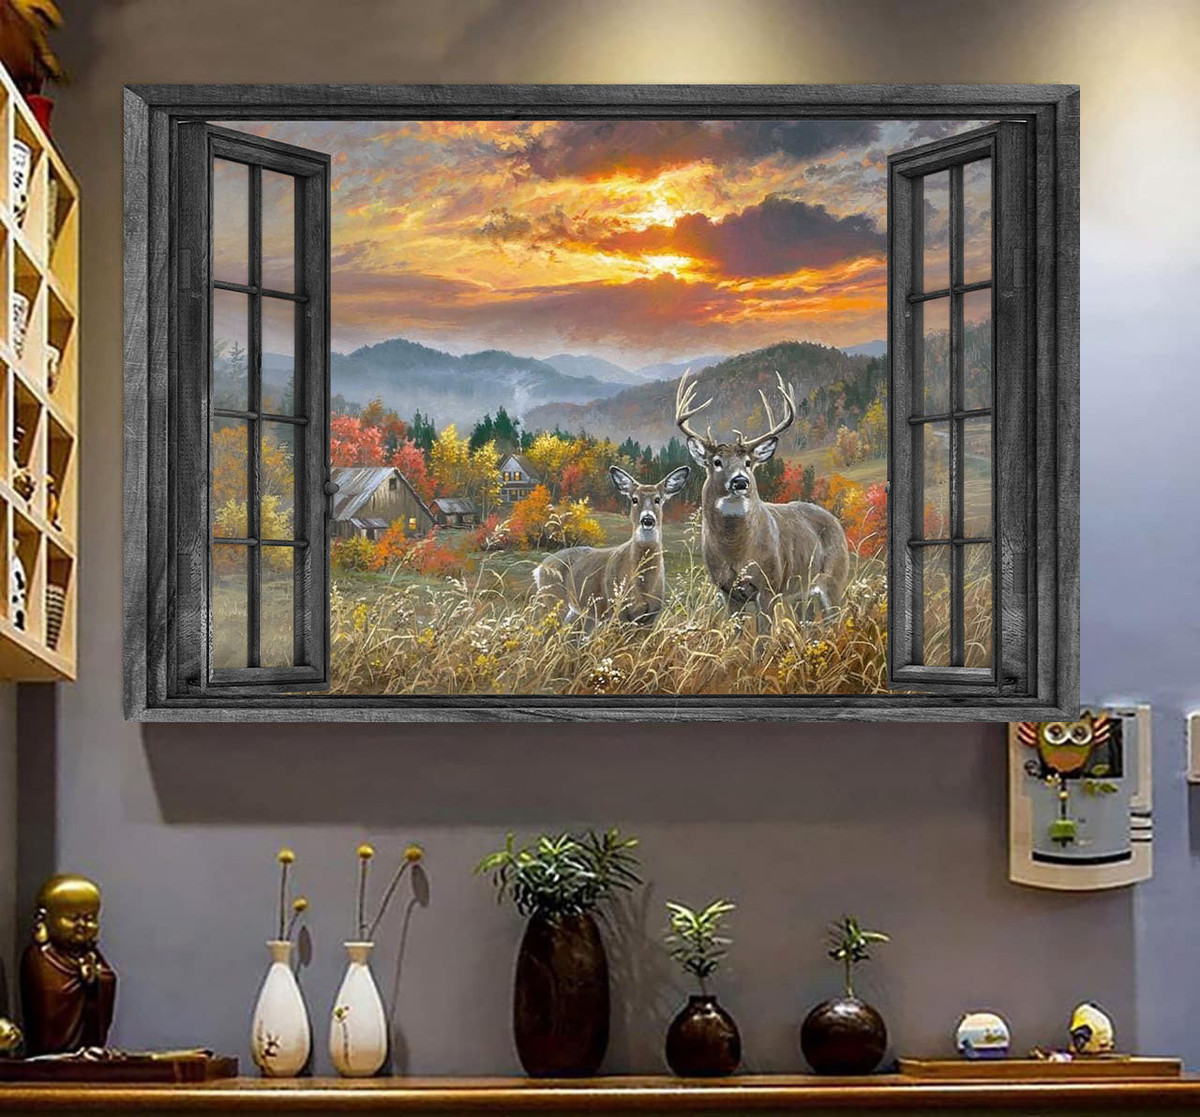 Whitetail Deer 3D Wall Art Painting Art Hunting Lover Home Decoration Easter Landscape Seen Through Window Scene Wall Mural, 3D Window Wall Decal, Window Wall Mural, Window Wall Sticker, Window Sticker Gift Idea 18x30IN